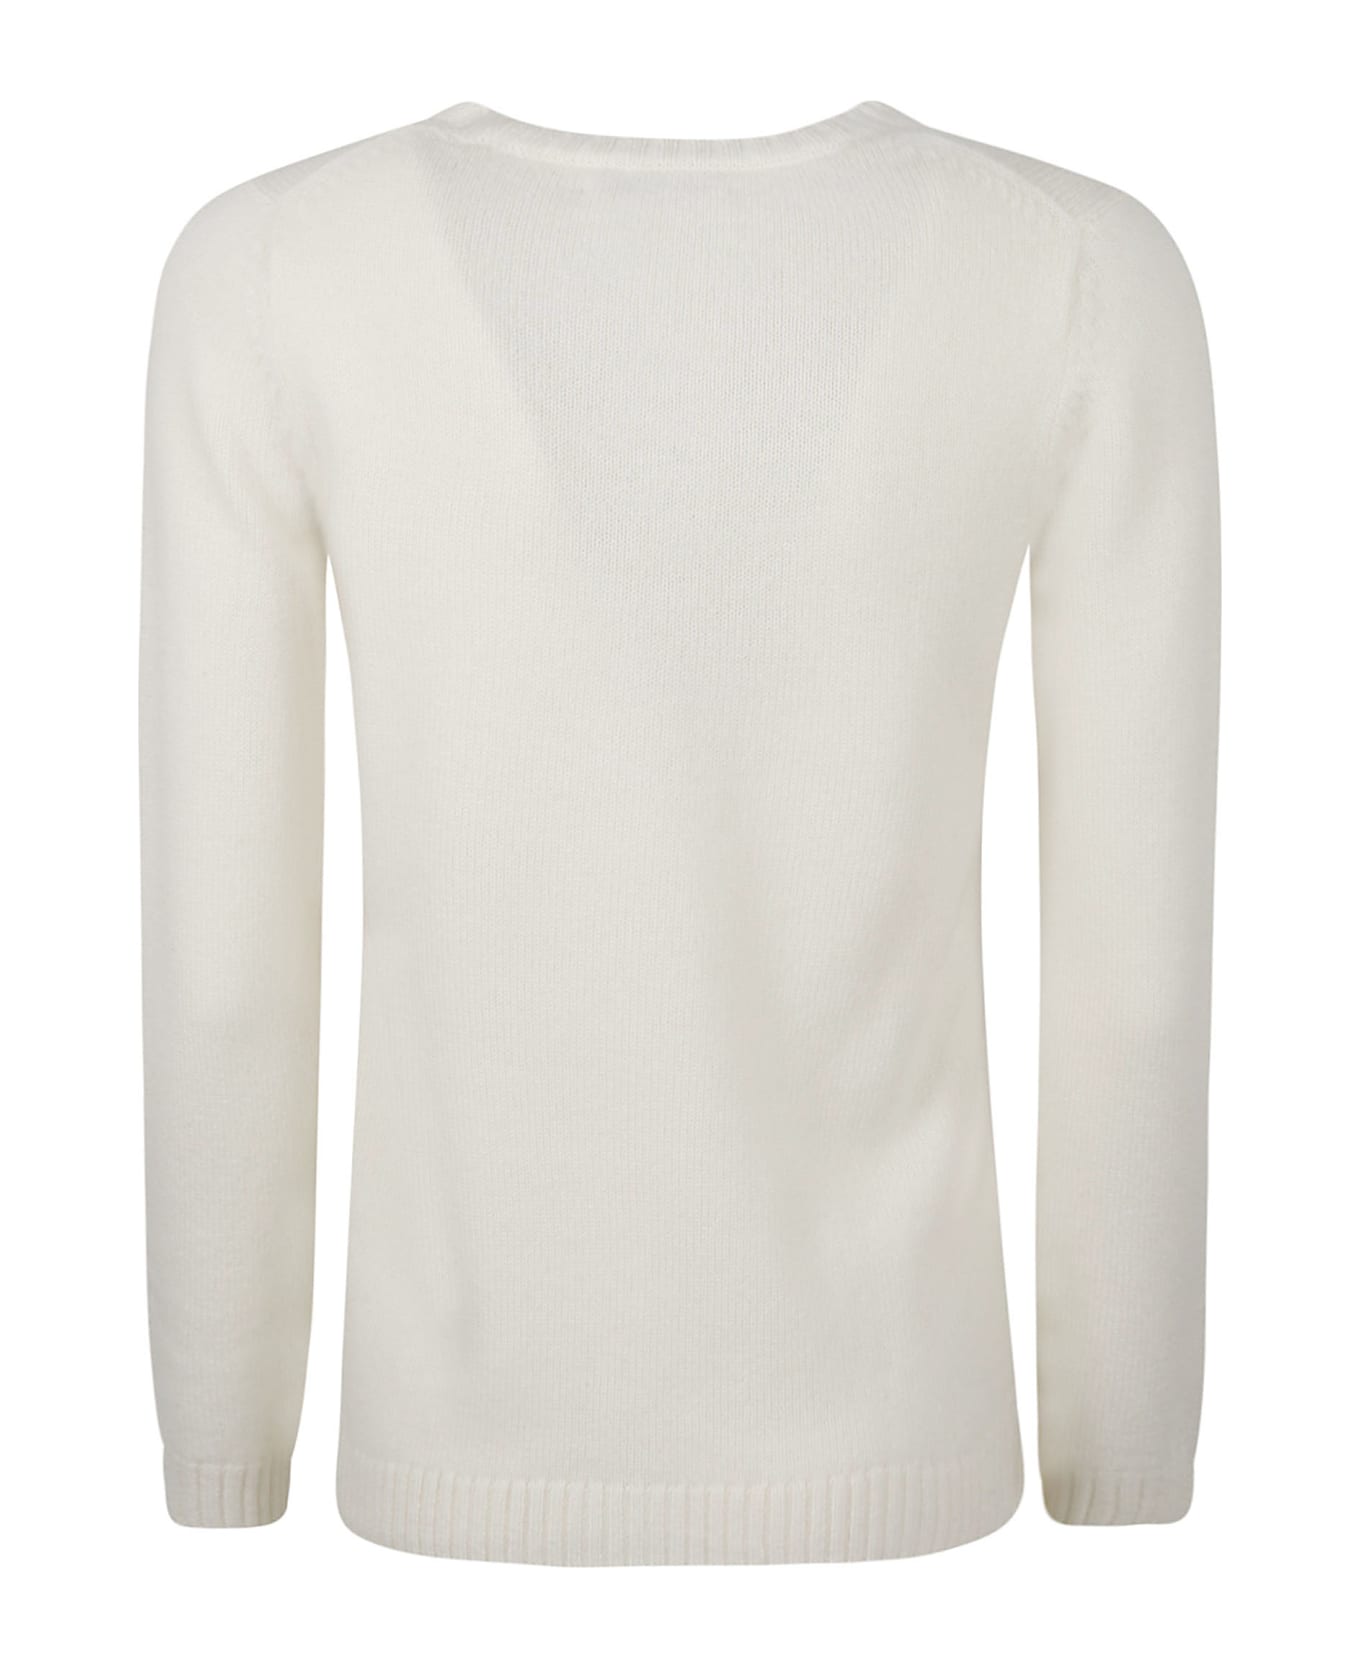 Be You Round Neck Sweater - White